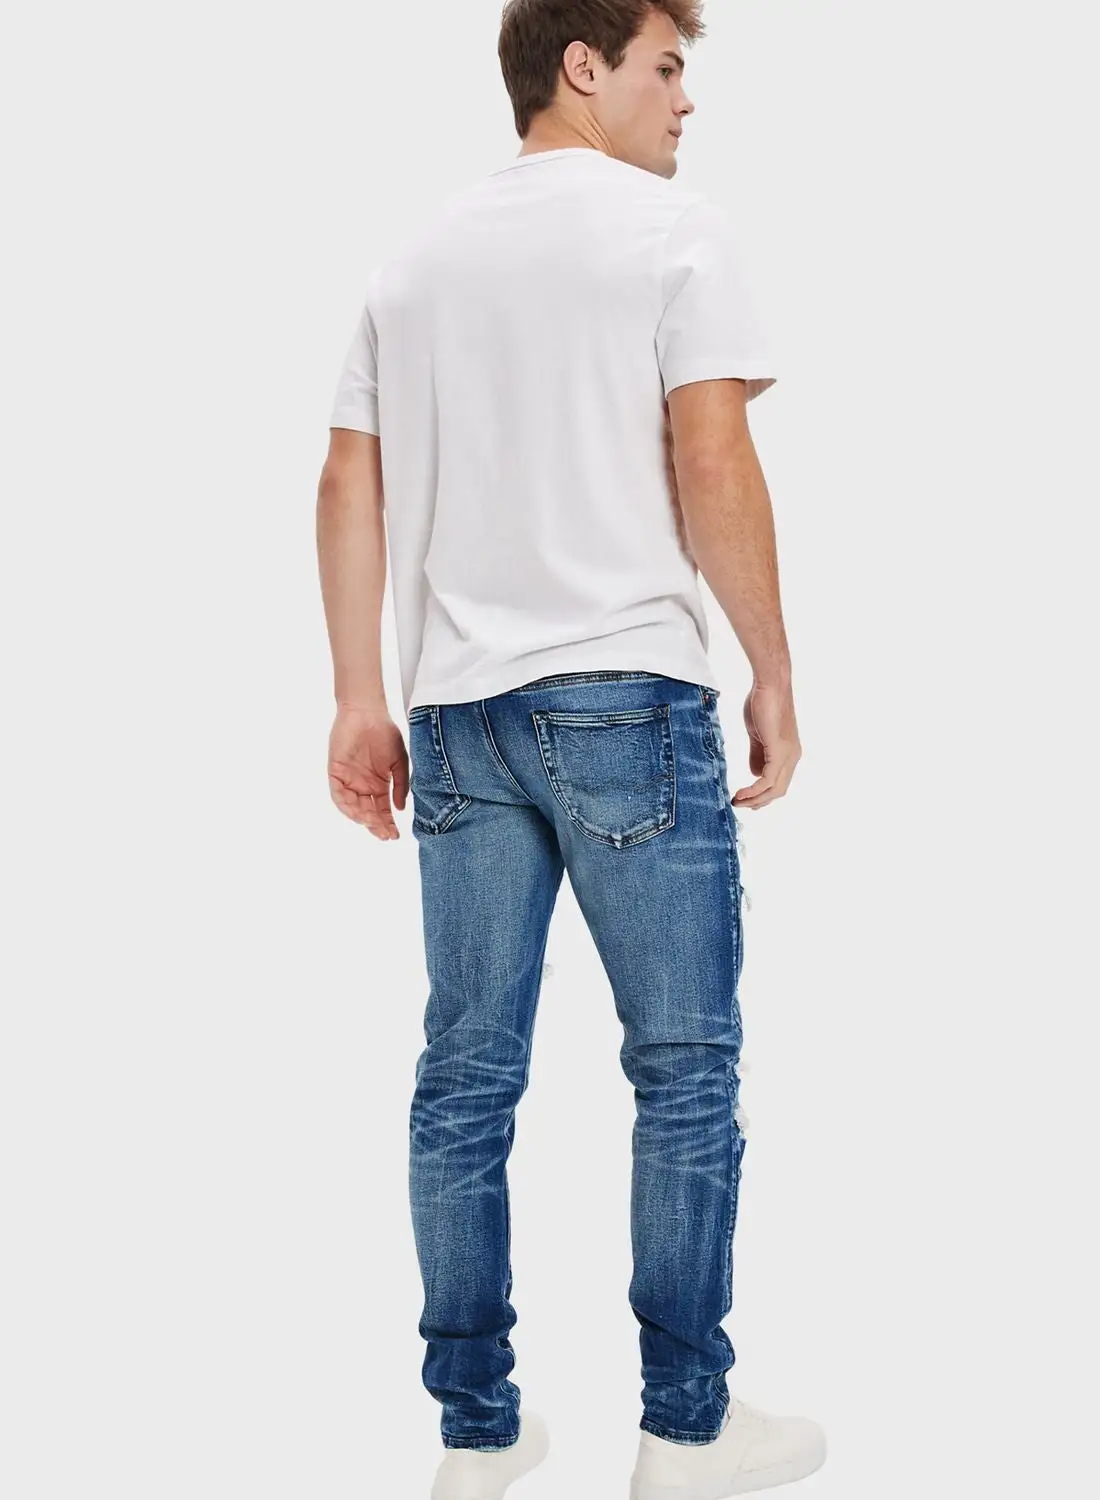 American Eagle Distressed Skinny Fit Jeans